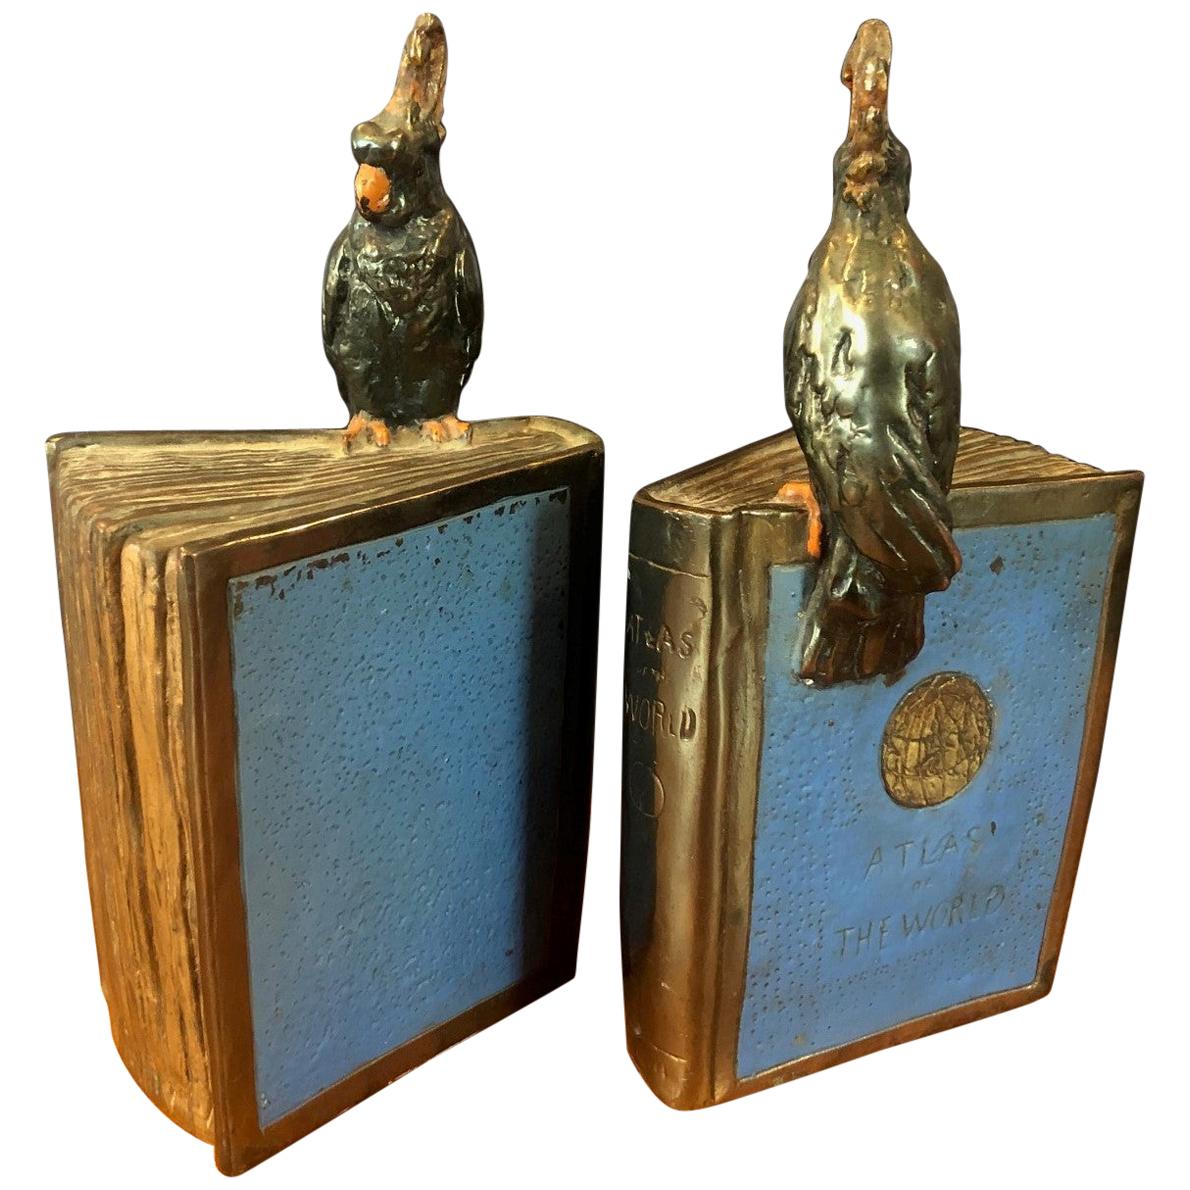 Pair of Bronze Clad "Atlas of the World" Bookends by Pompeian Bronze Co.